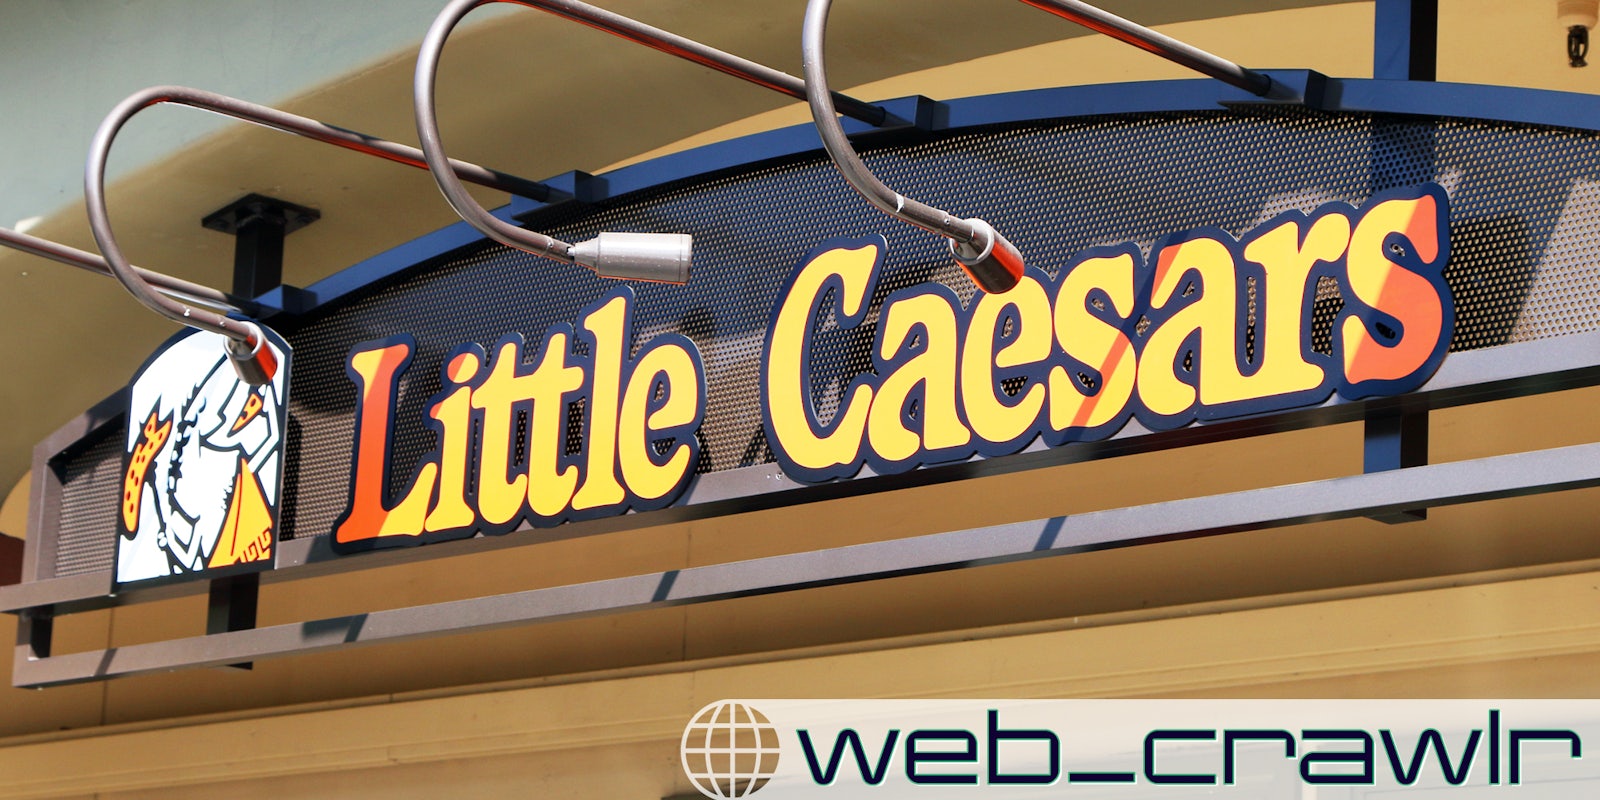 A Little Caesars sign. The Daily Dot newsletter web_crawlr logo is in the bottom right corner.